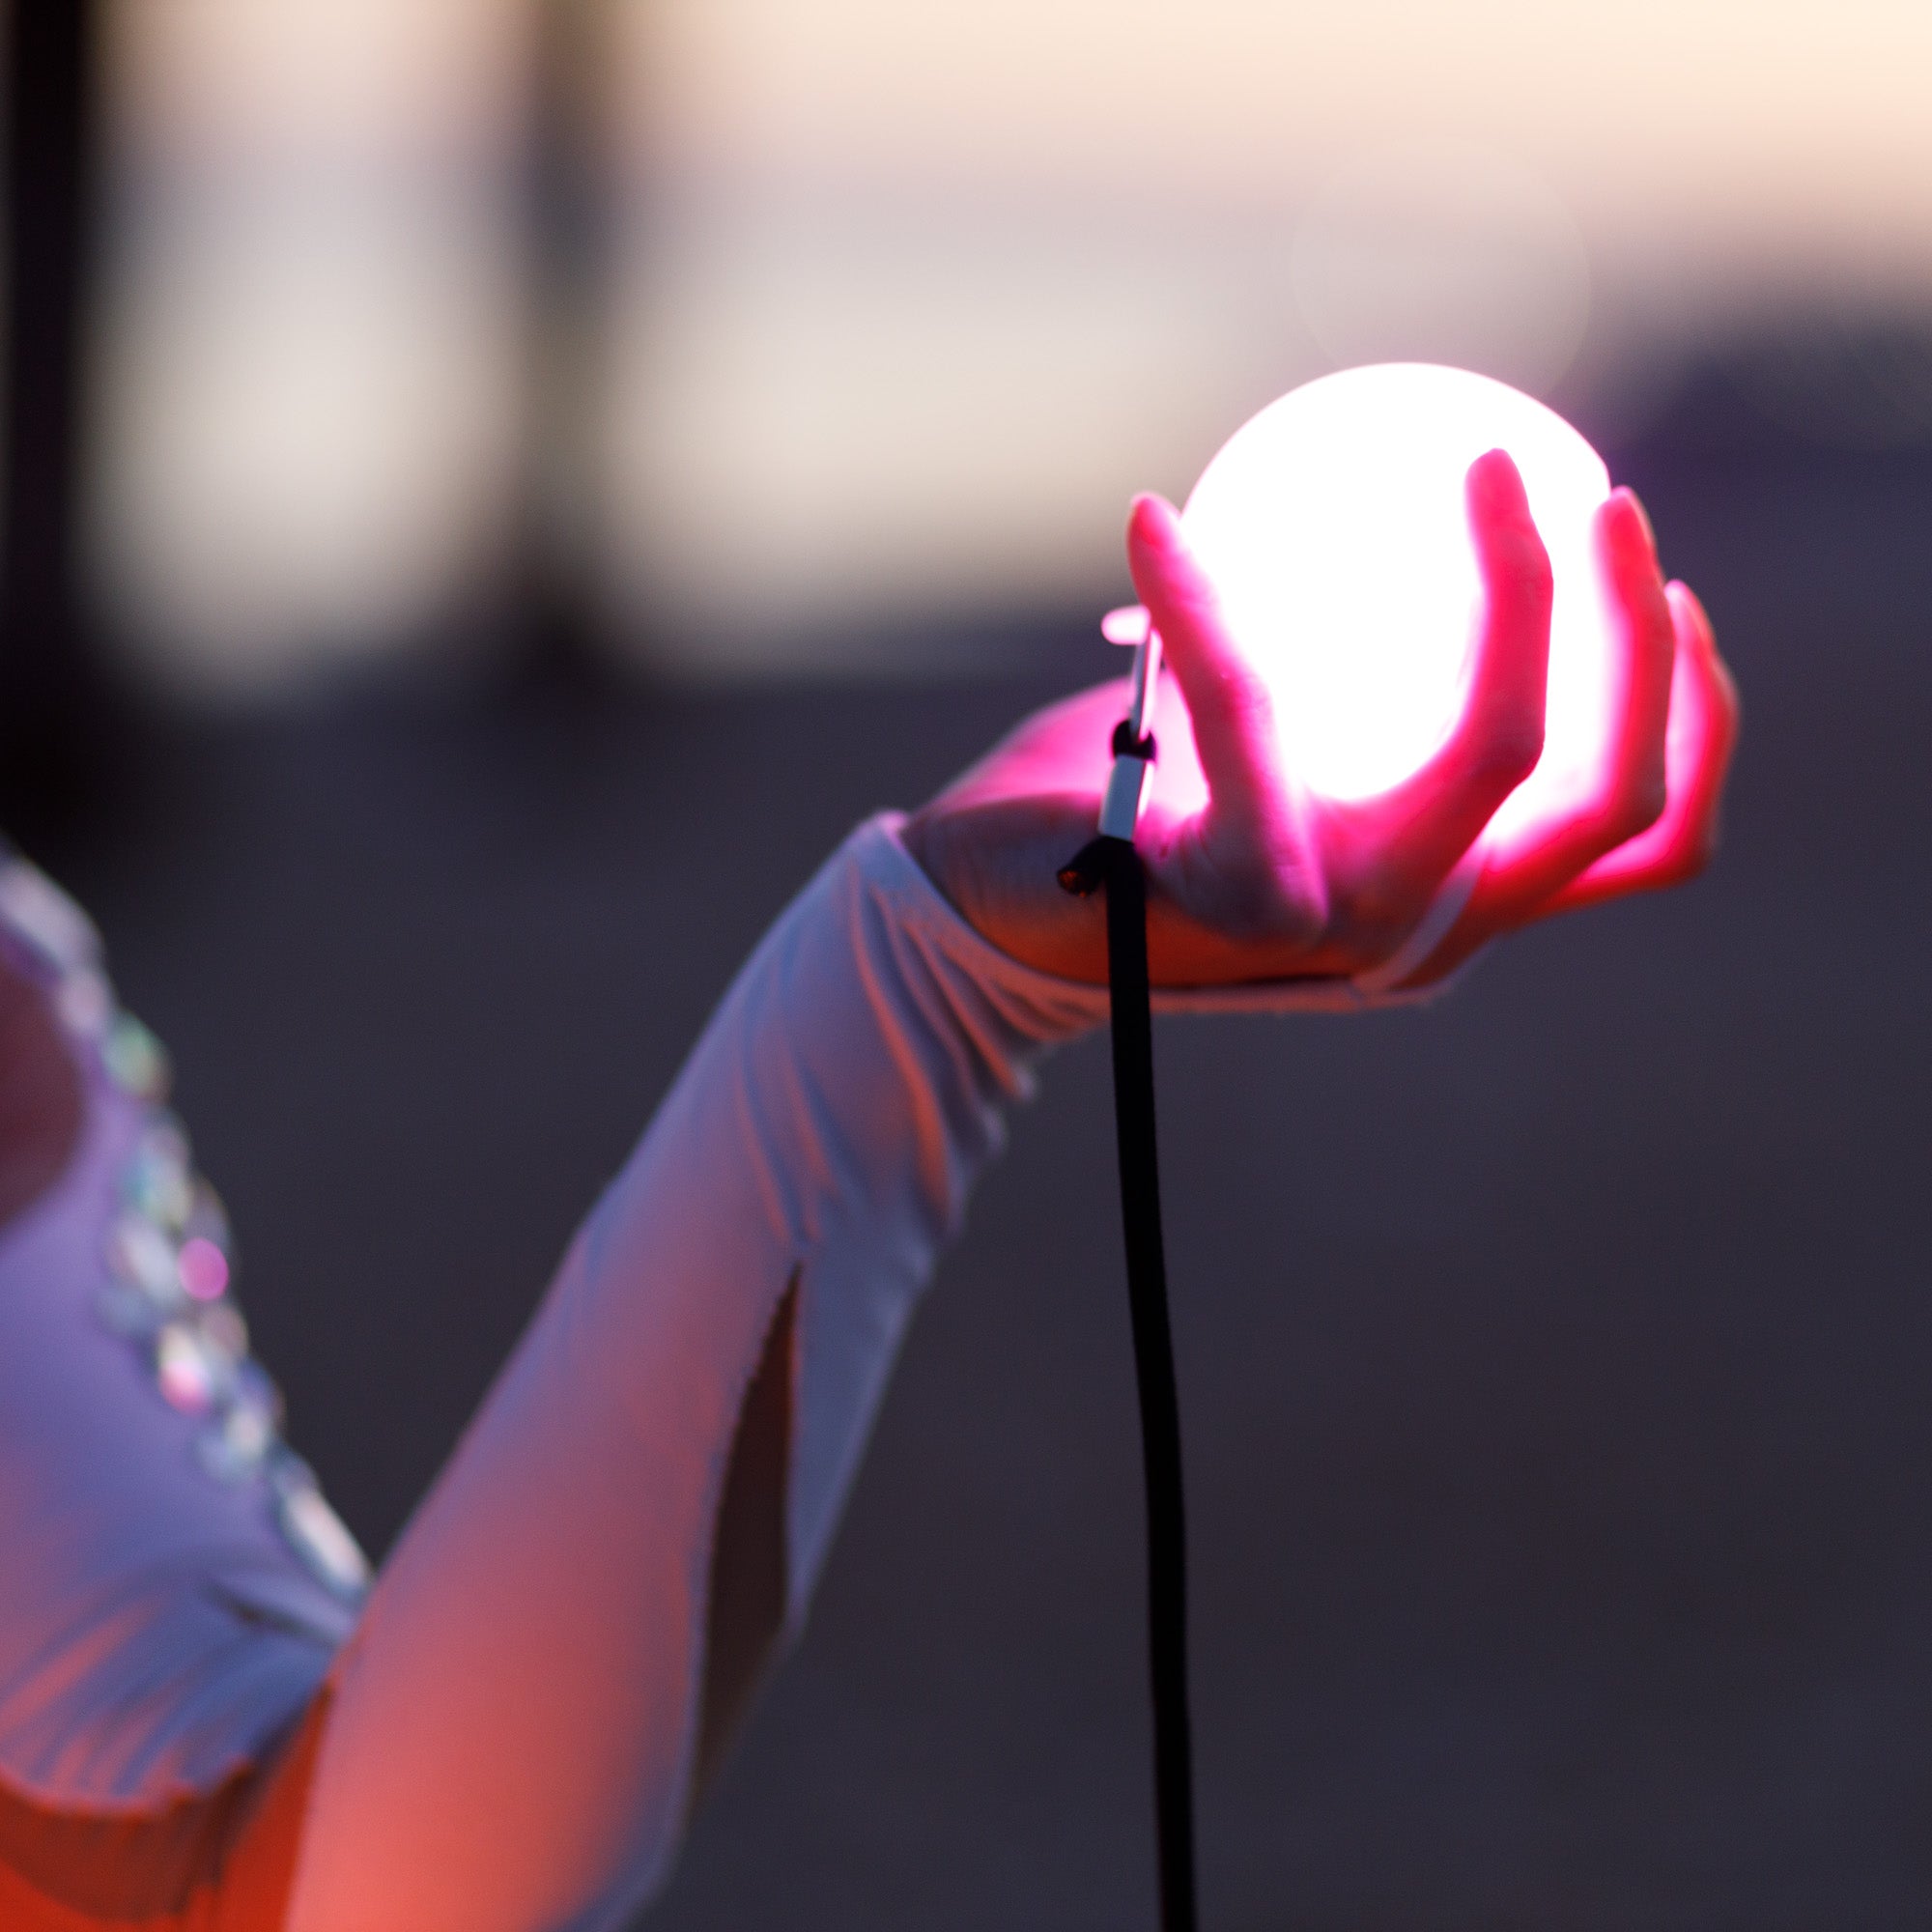 glow poi glowing brightly in a performers hand